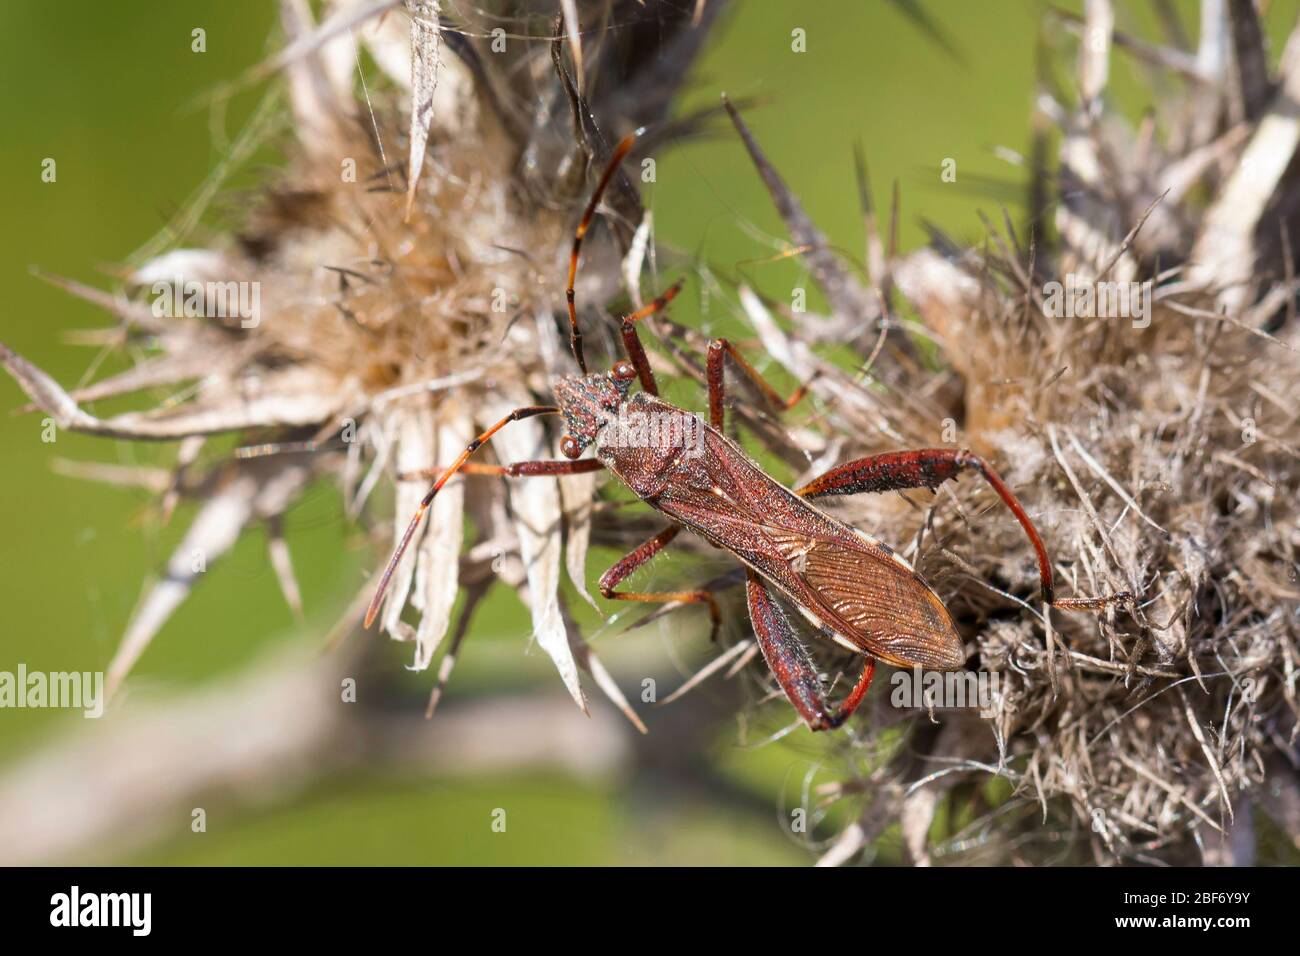 Broad-headed Bug (Camptopus lateralis), on withered thistles, Germany Stock Photo